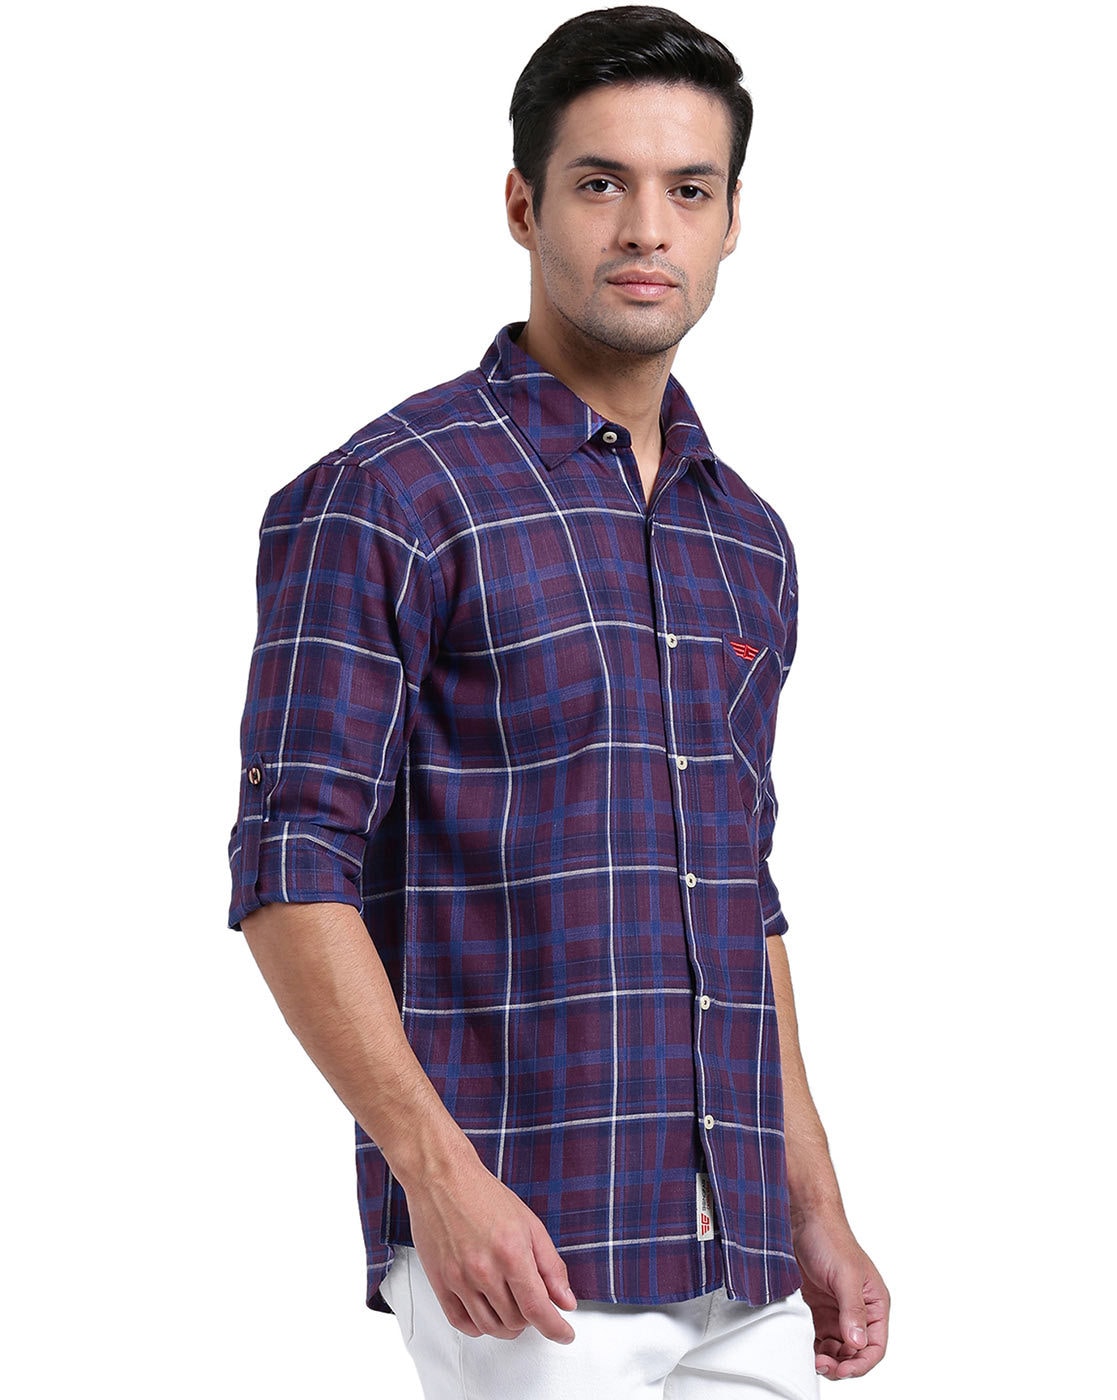 SUBCULTURE WOOL CHECK SHIRT / PURPLE